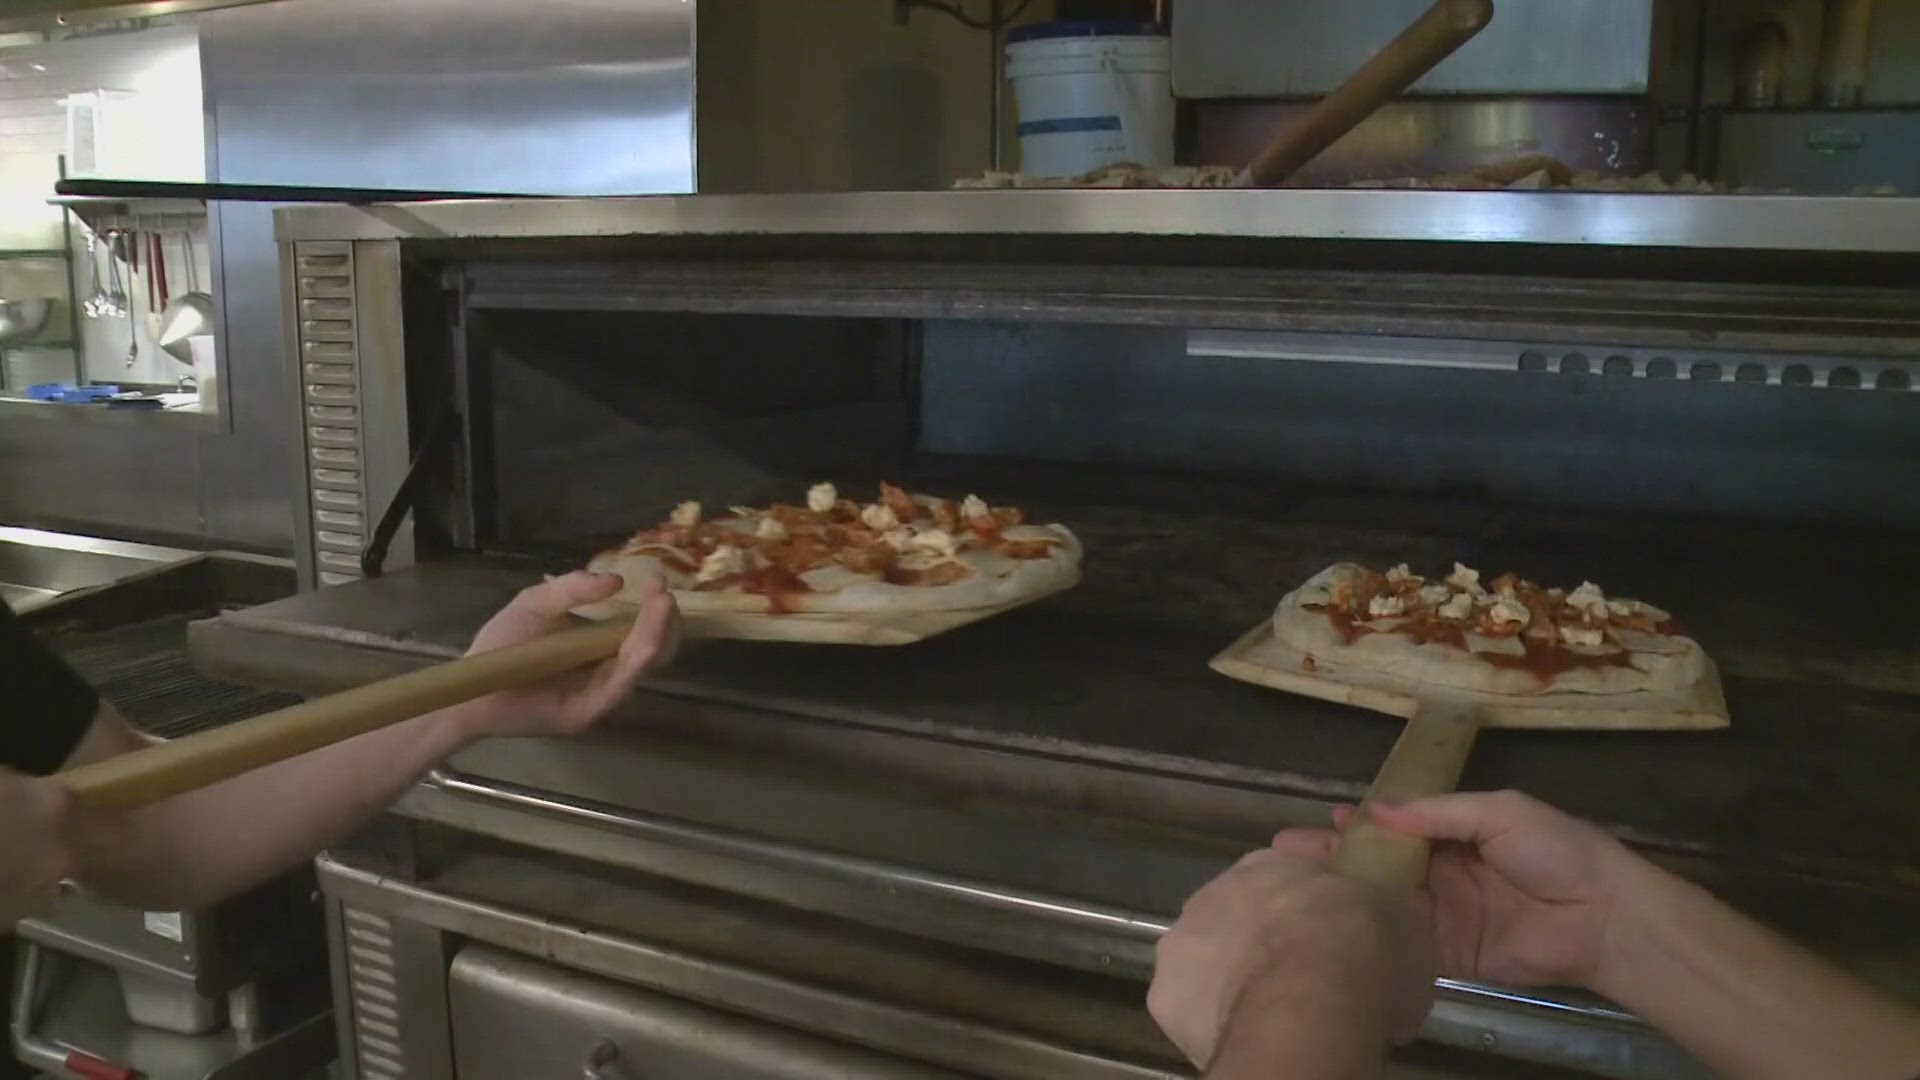 NEWS CENTER Maine's Aaron Myler learns how to make pizza at Monte's Find Foods in Portland.